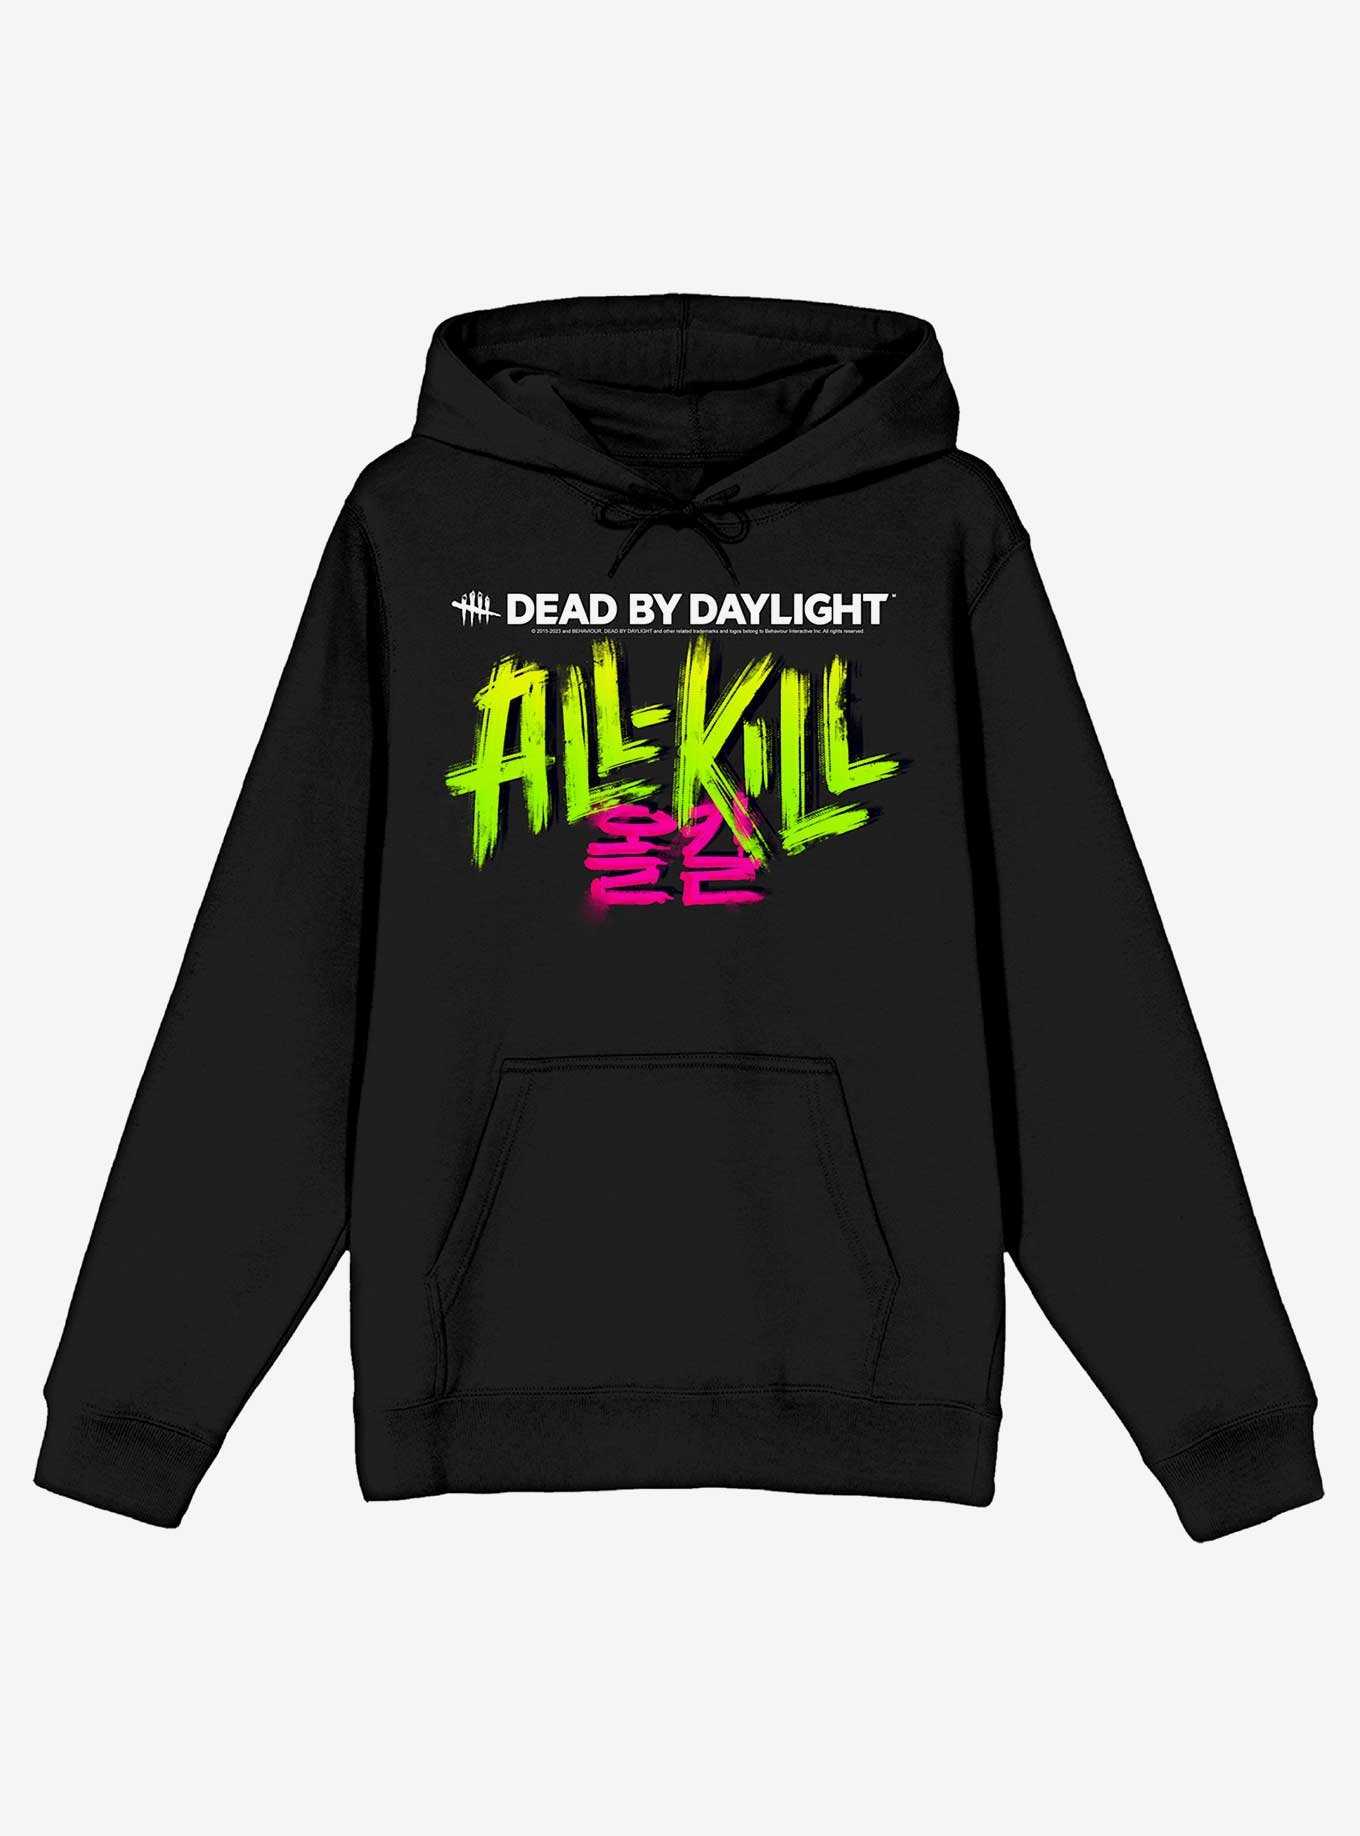 Dead By Daylight All-Kill Hoodie, , hi-res